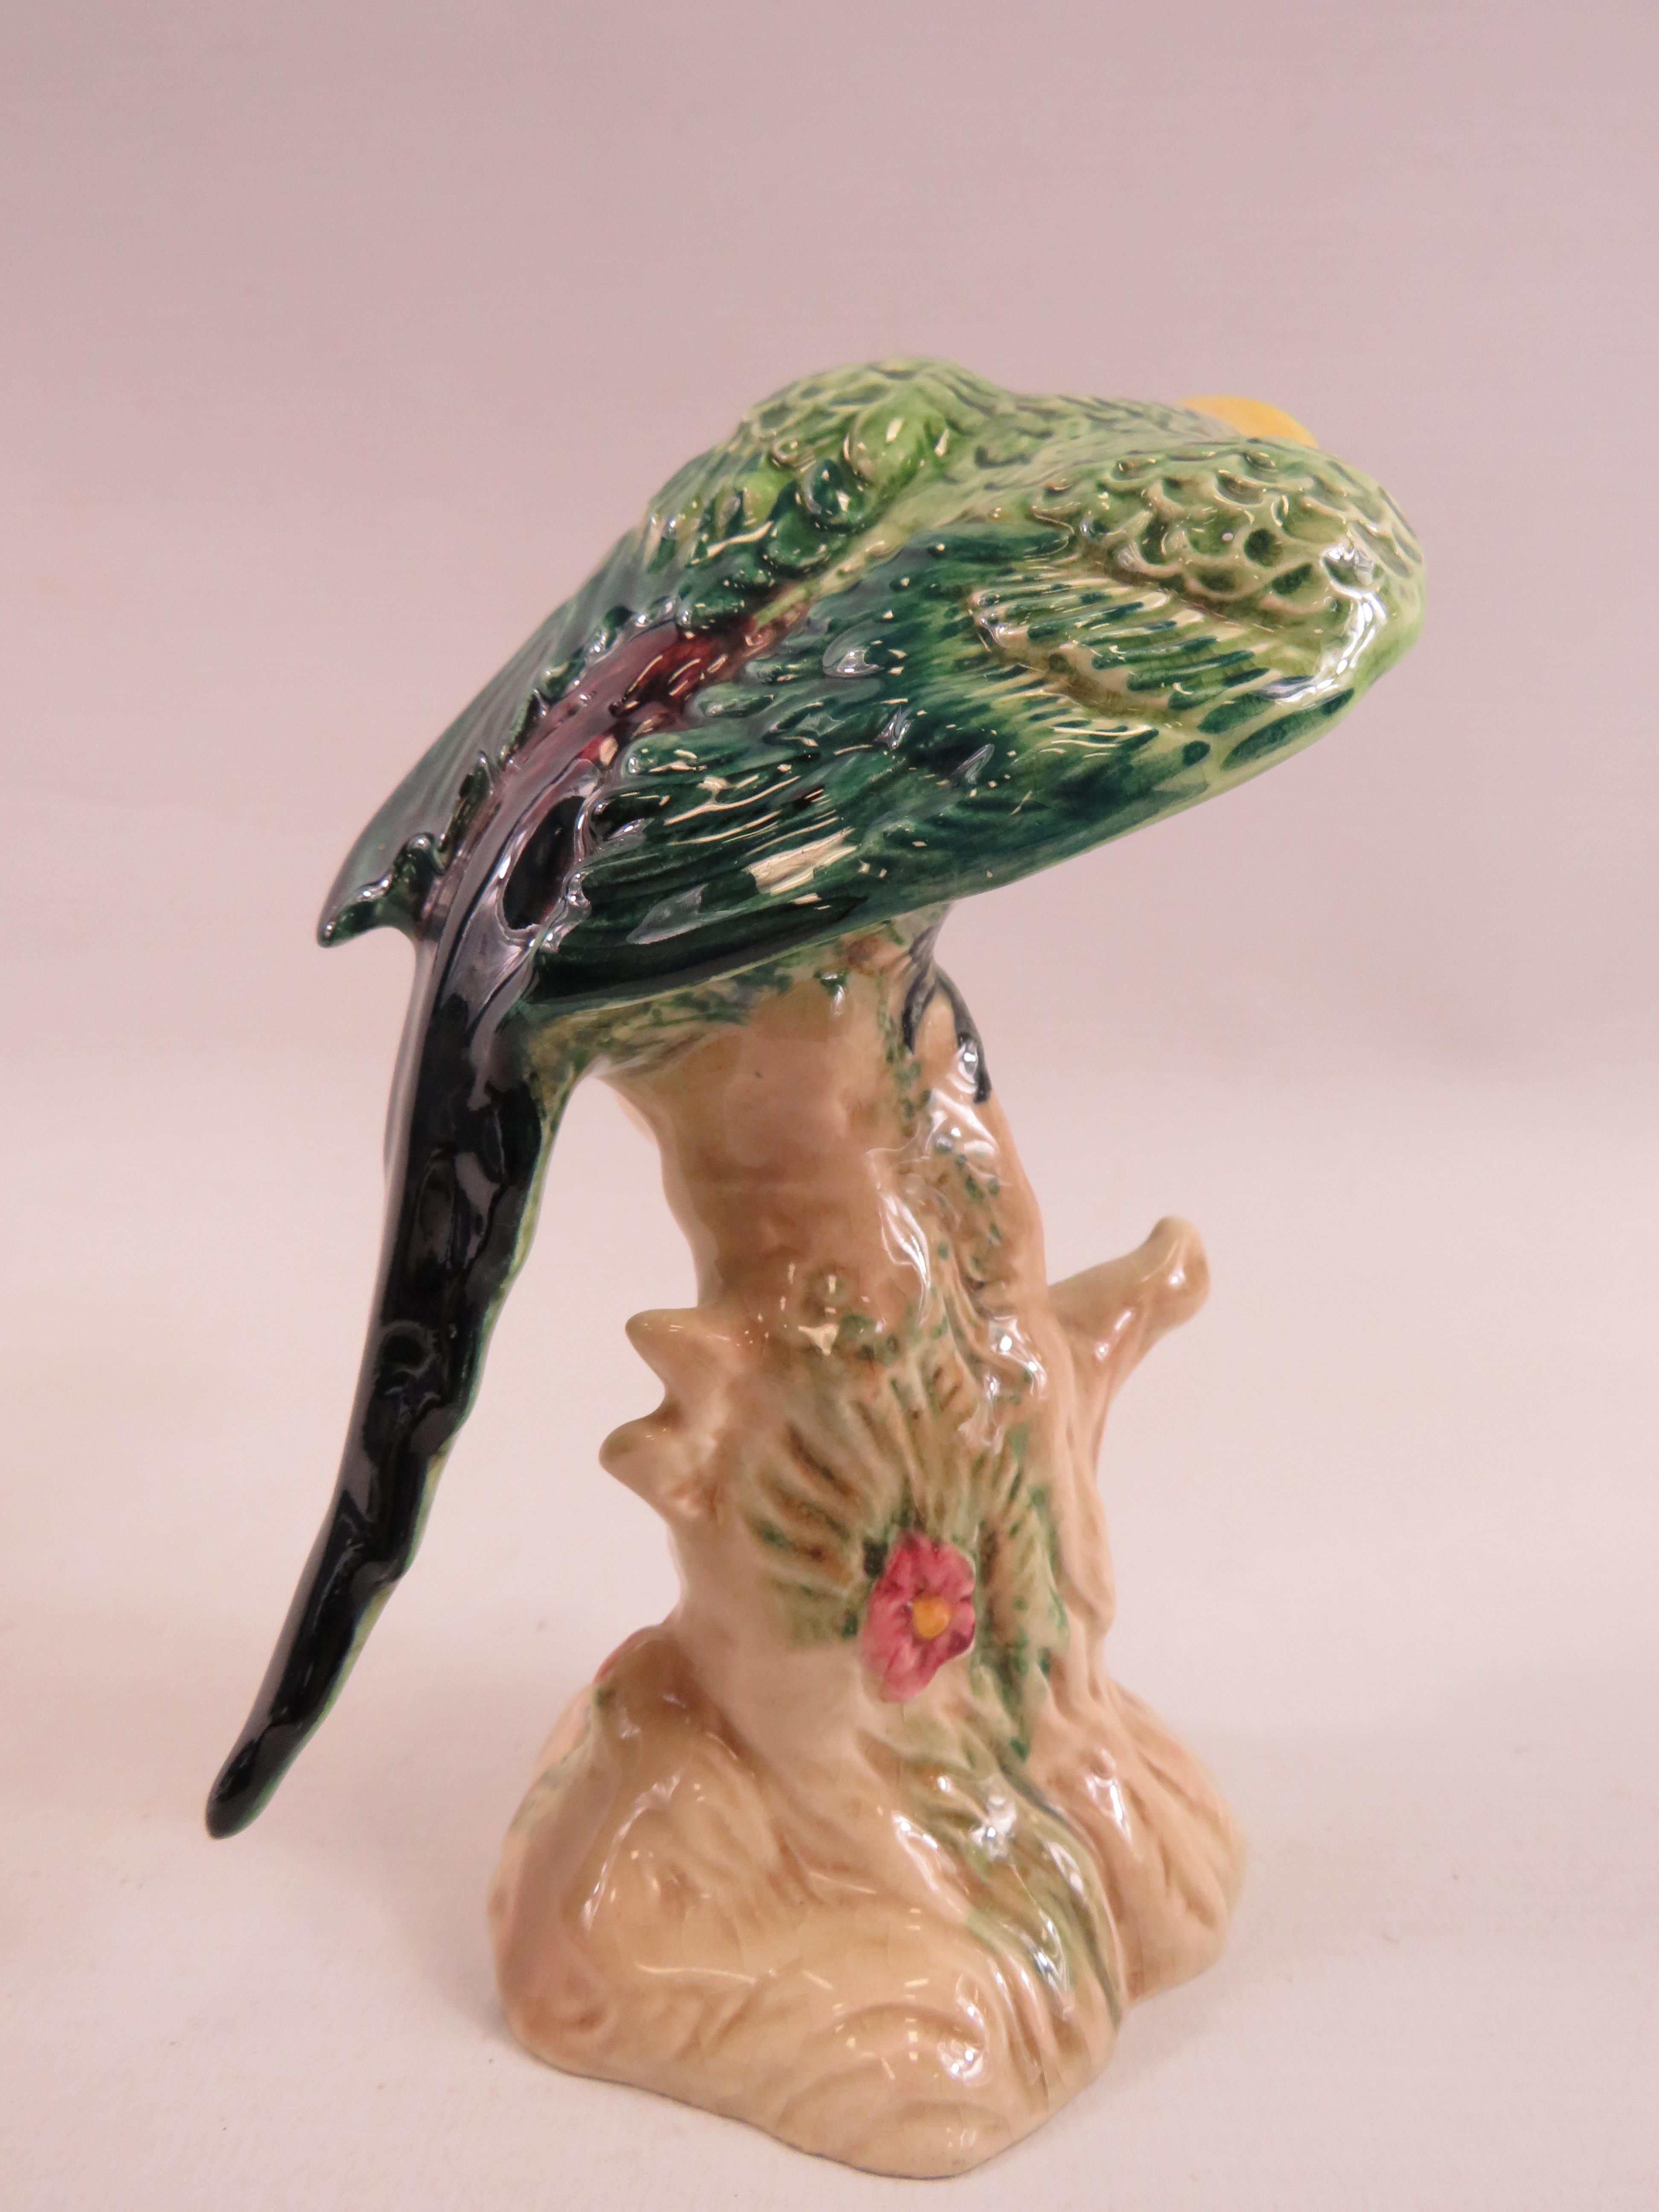 Beswick green parrot figurine, model no 930. approx 6" tall. - Image 3 of 5